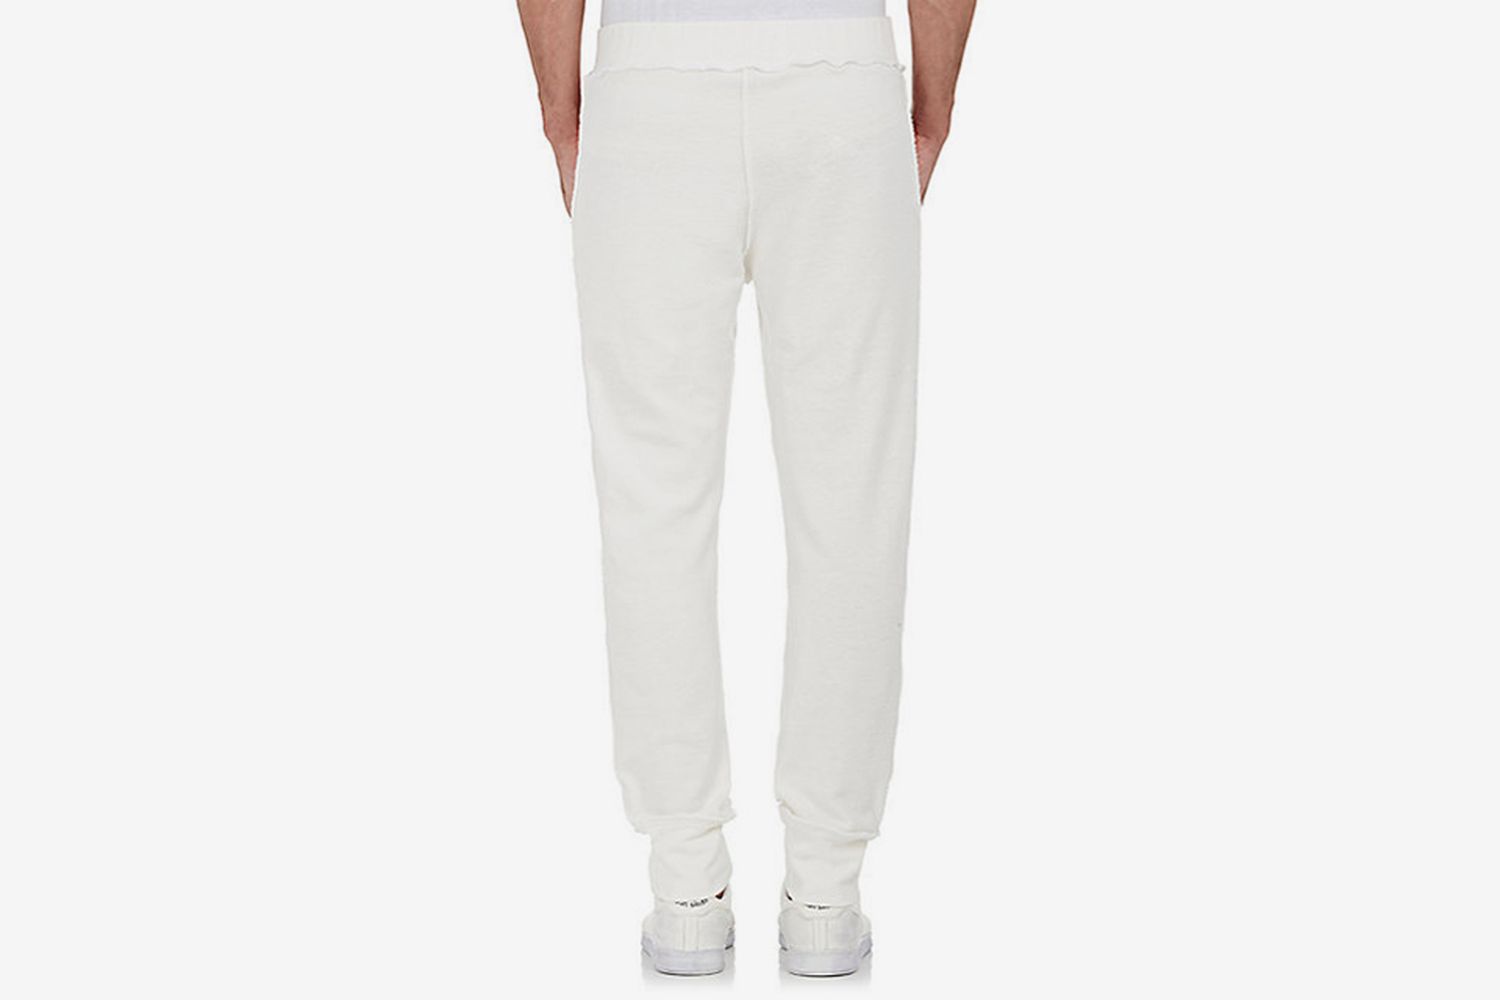 "Inside-Out" Cotton Terry Jogger Pants